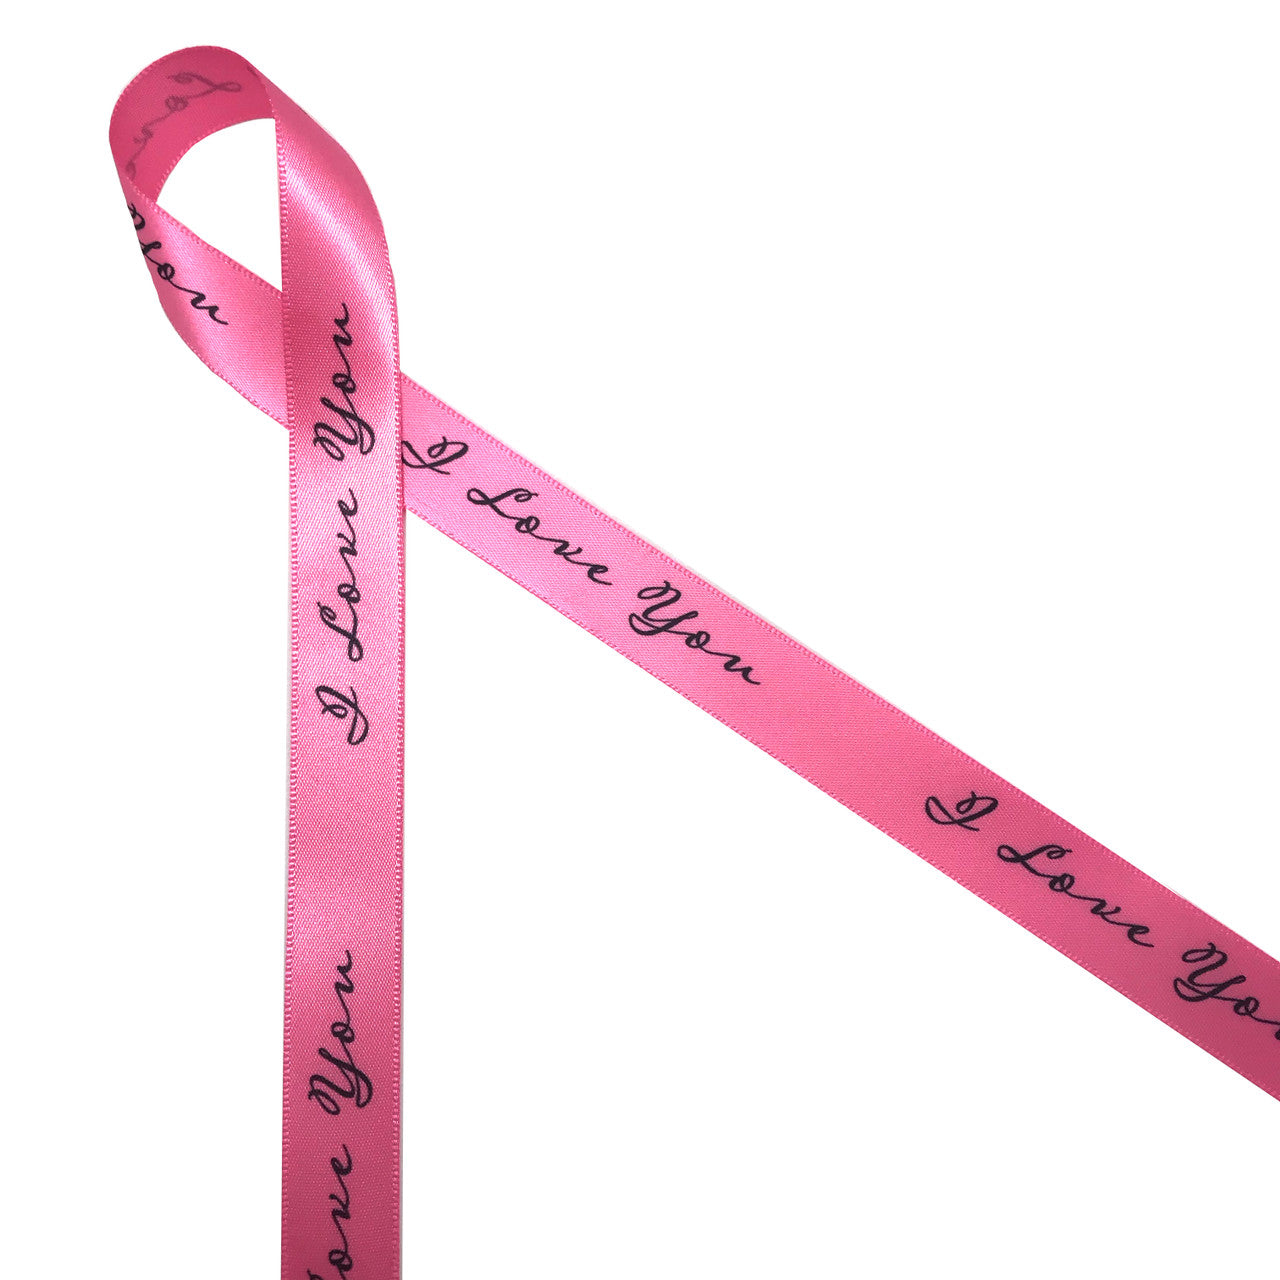 I Love You is the perfect expression of love and care for Valentine's Day or any day!  I Love You printed in black printed on 5/8" hot pink single face satin ribbon is the perfect addition to special loving gifts for engagements, weddings, and of course Valentine's Day. All our ribbon is designed and printed in the USA